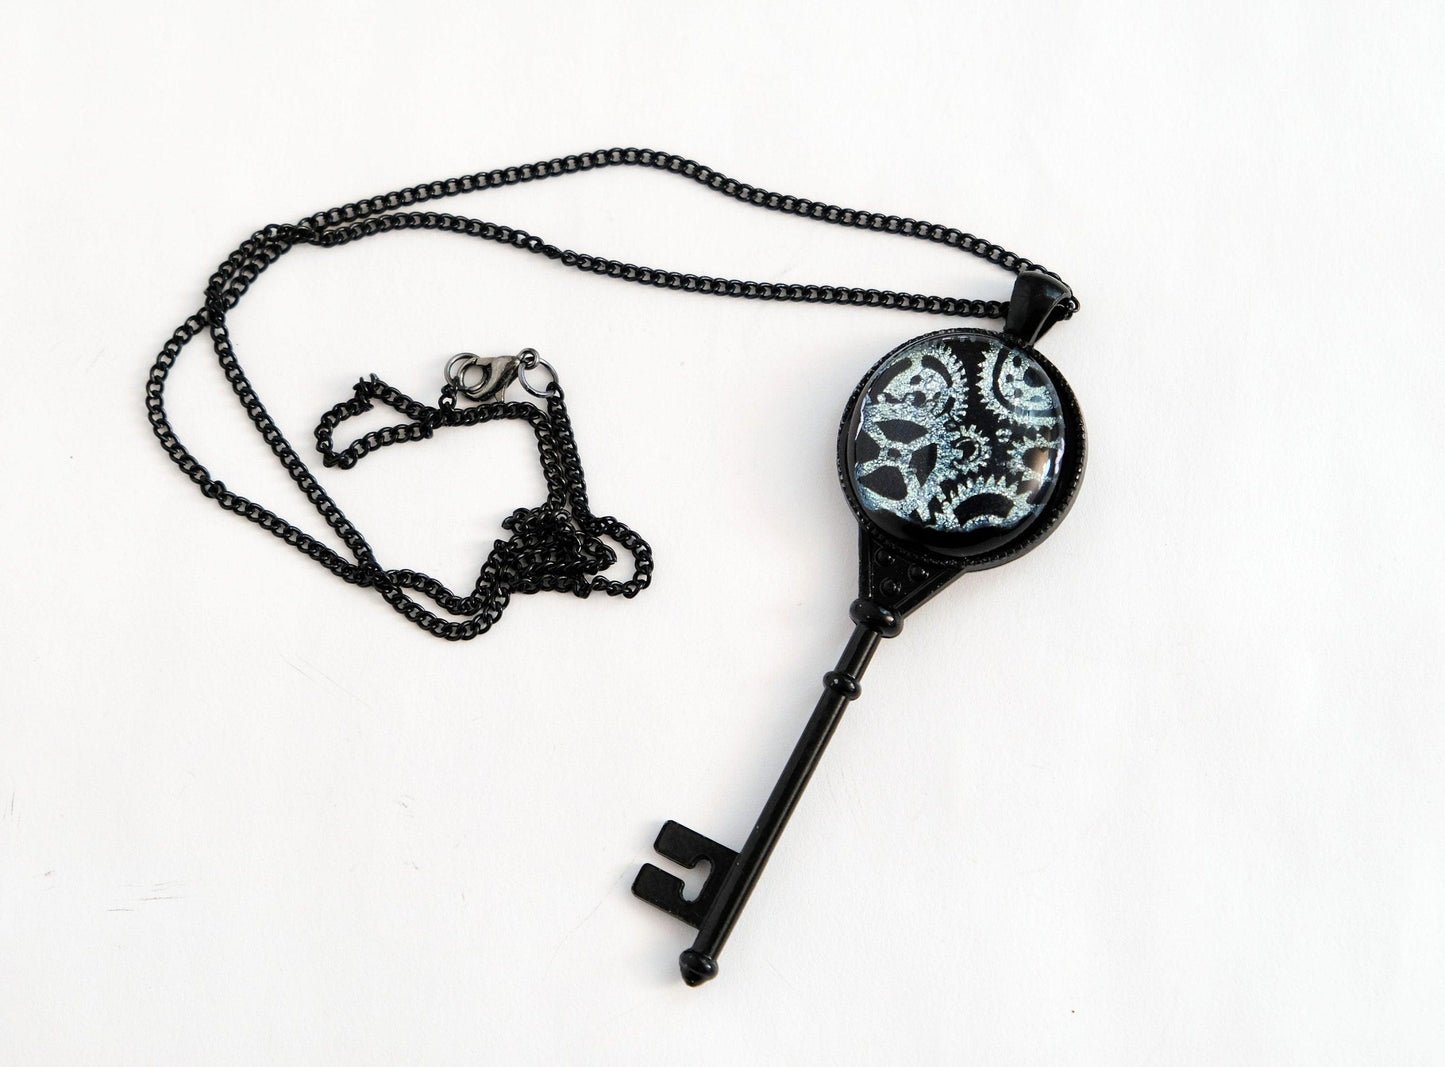 Steampunk Black Metal Skeleton Key pendant necklace with Fused Glass Silver Gears cabochon on 24 inch black chain jewelry seeds glassworks seedsglassworks